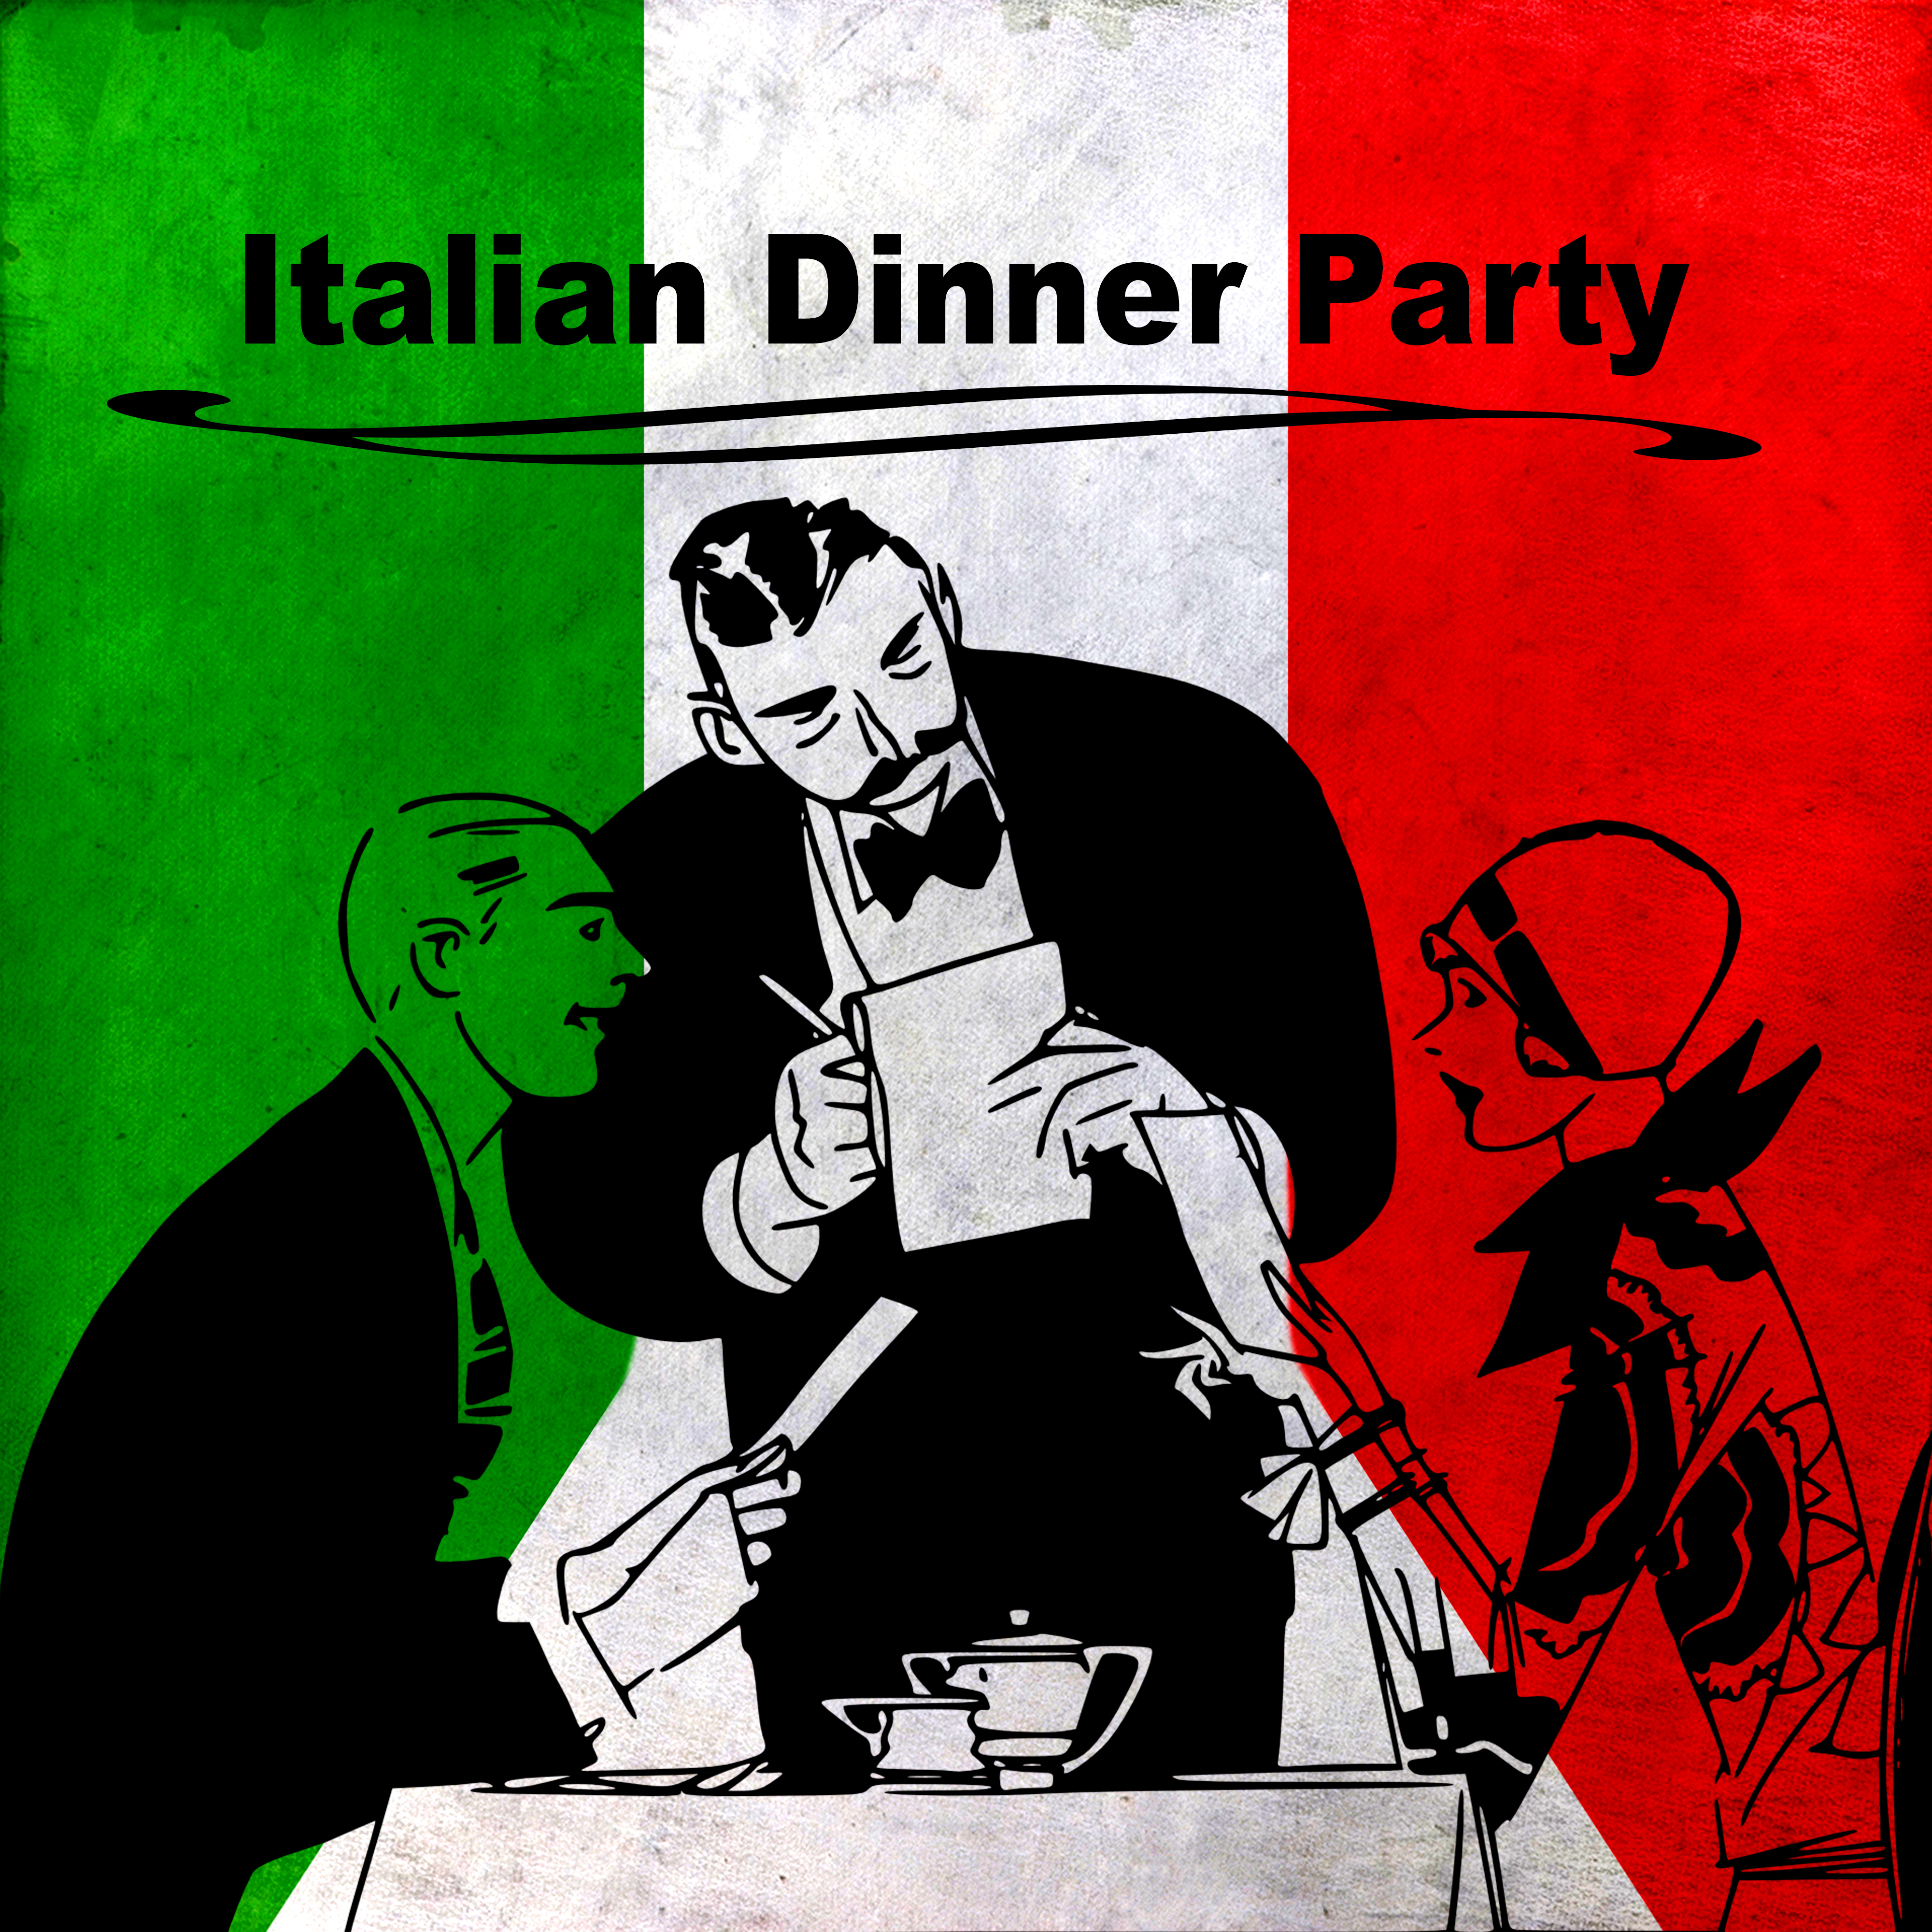 Italian Dinner Party – Romantic Rome Chill Out, Luxury Lounge Bar, Restaurant Background Jazz Guitar Music